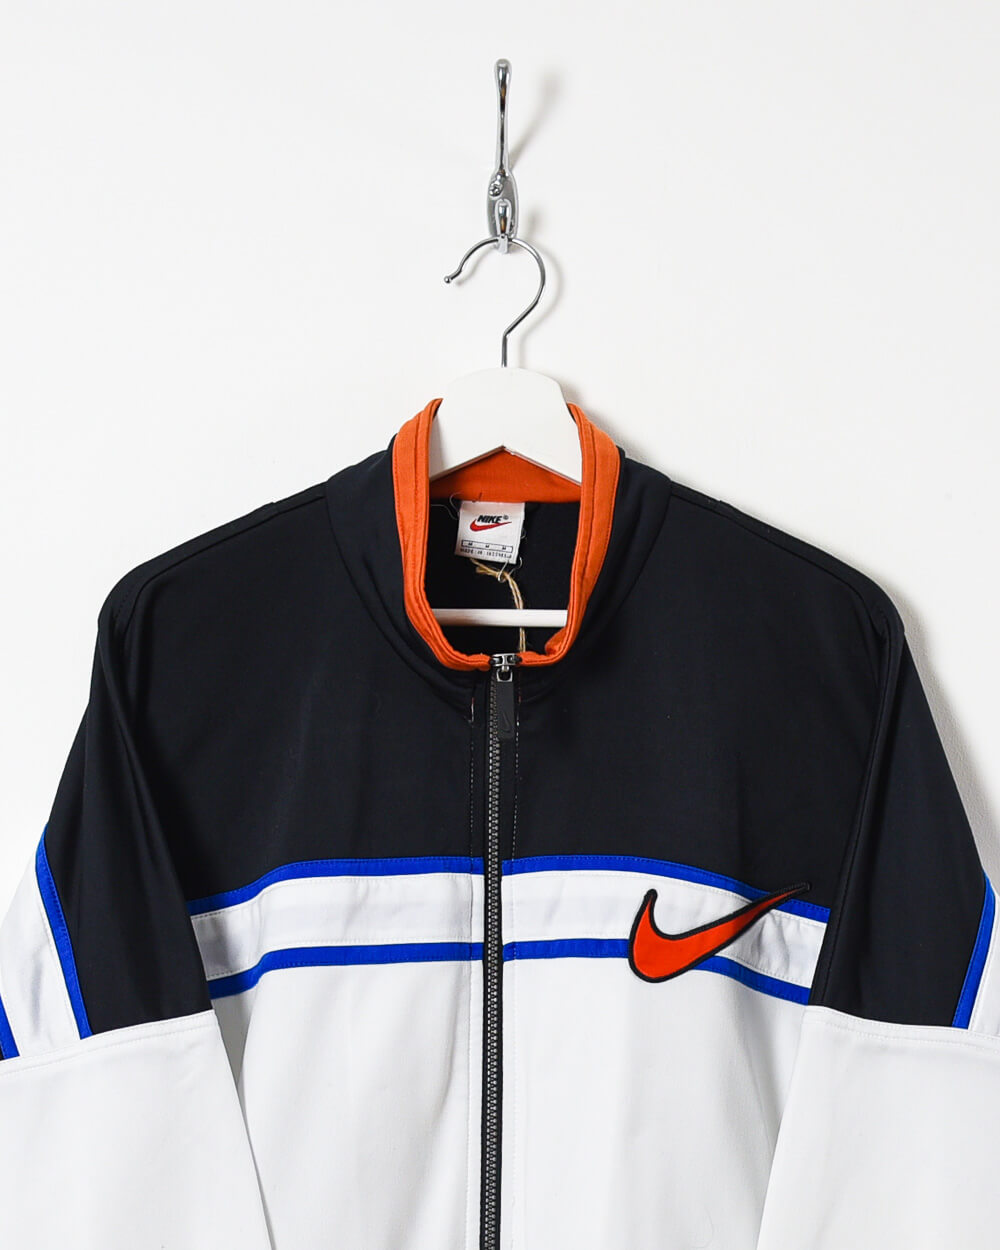 Nike Tracksuit Top - Medium - Domno Vintage 90s, 80s, 00s Retro and Vintage Clothing 